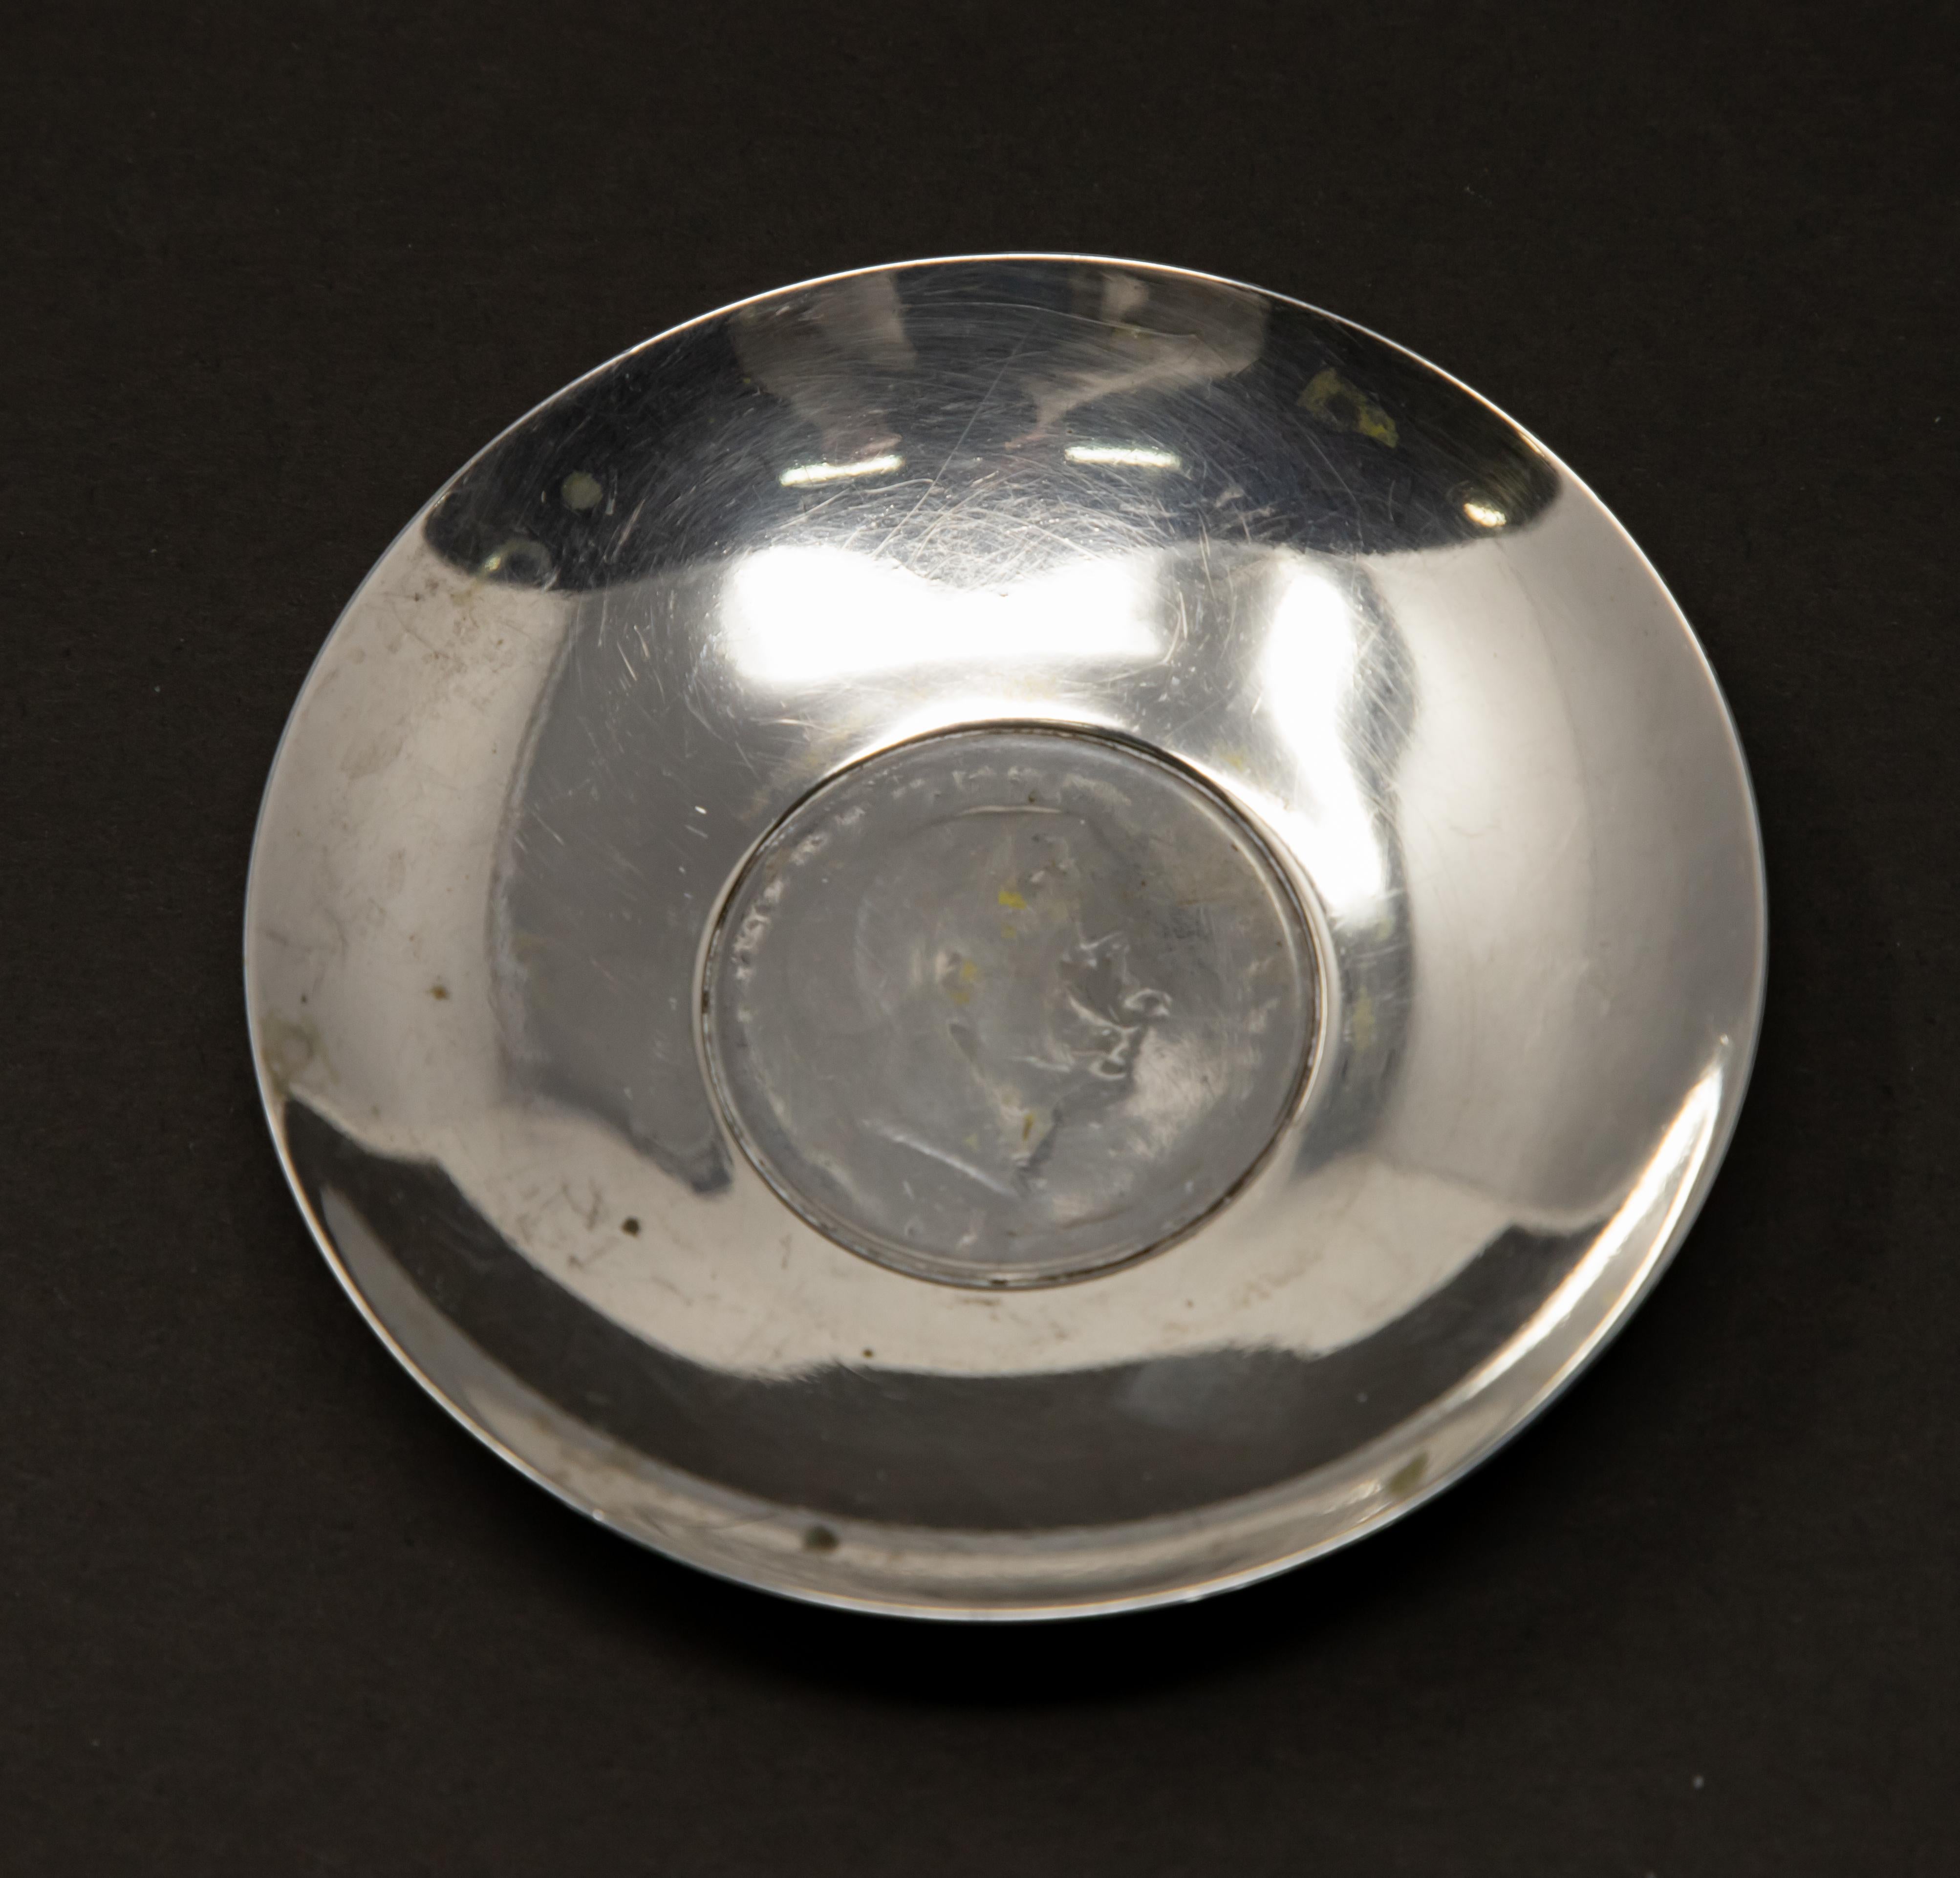 Offering this sterling silver coin dish with Romanian Coin.